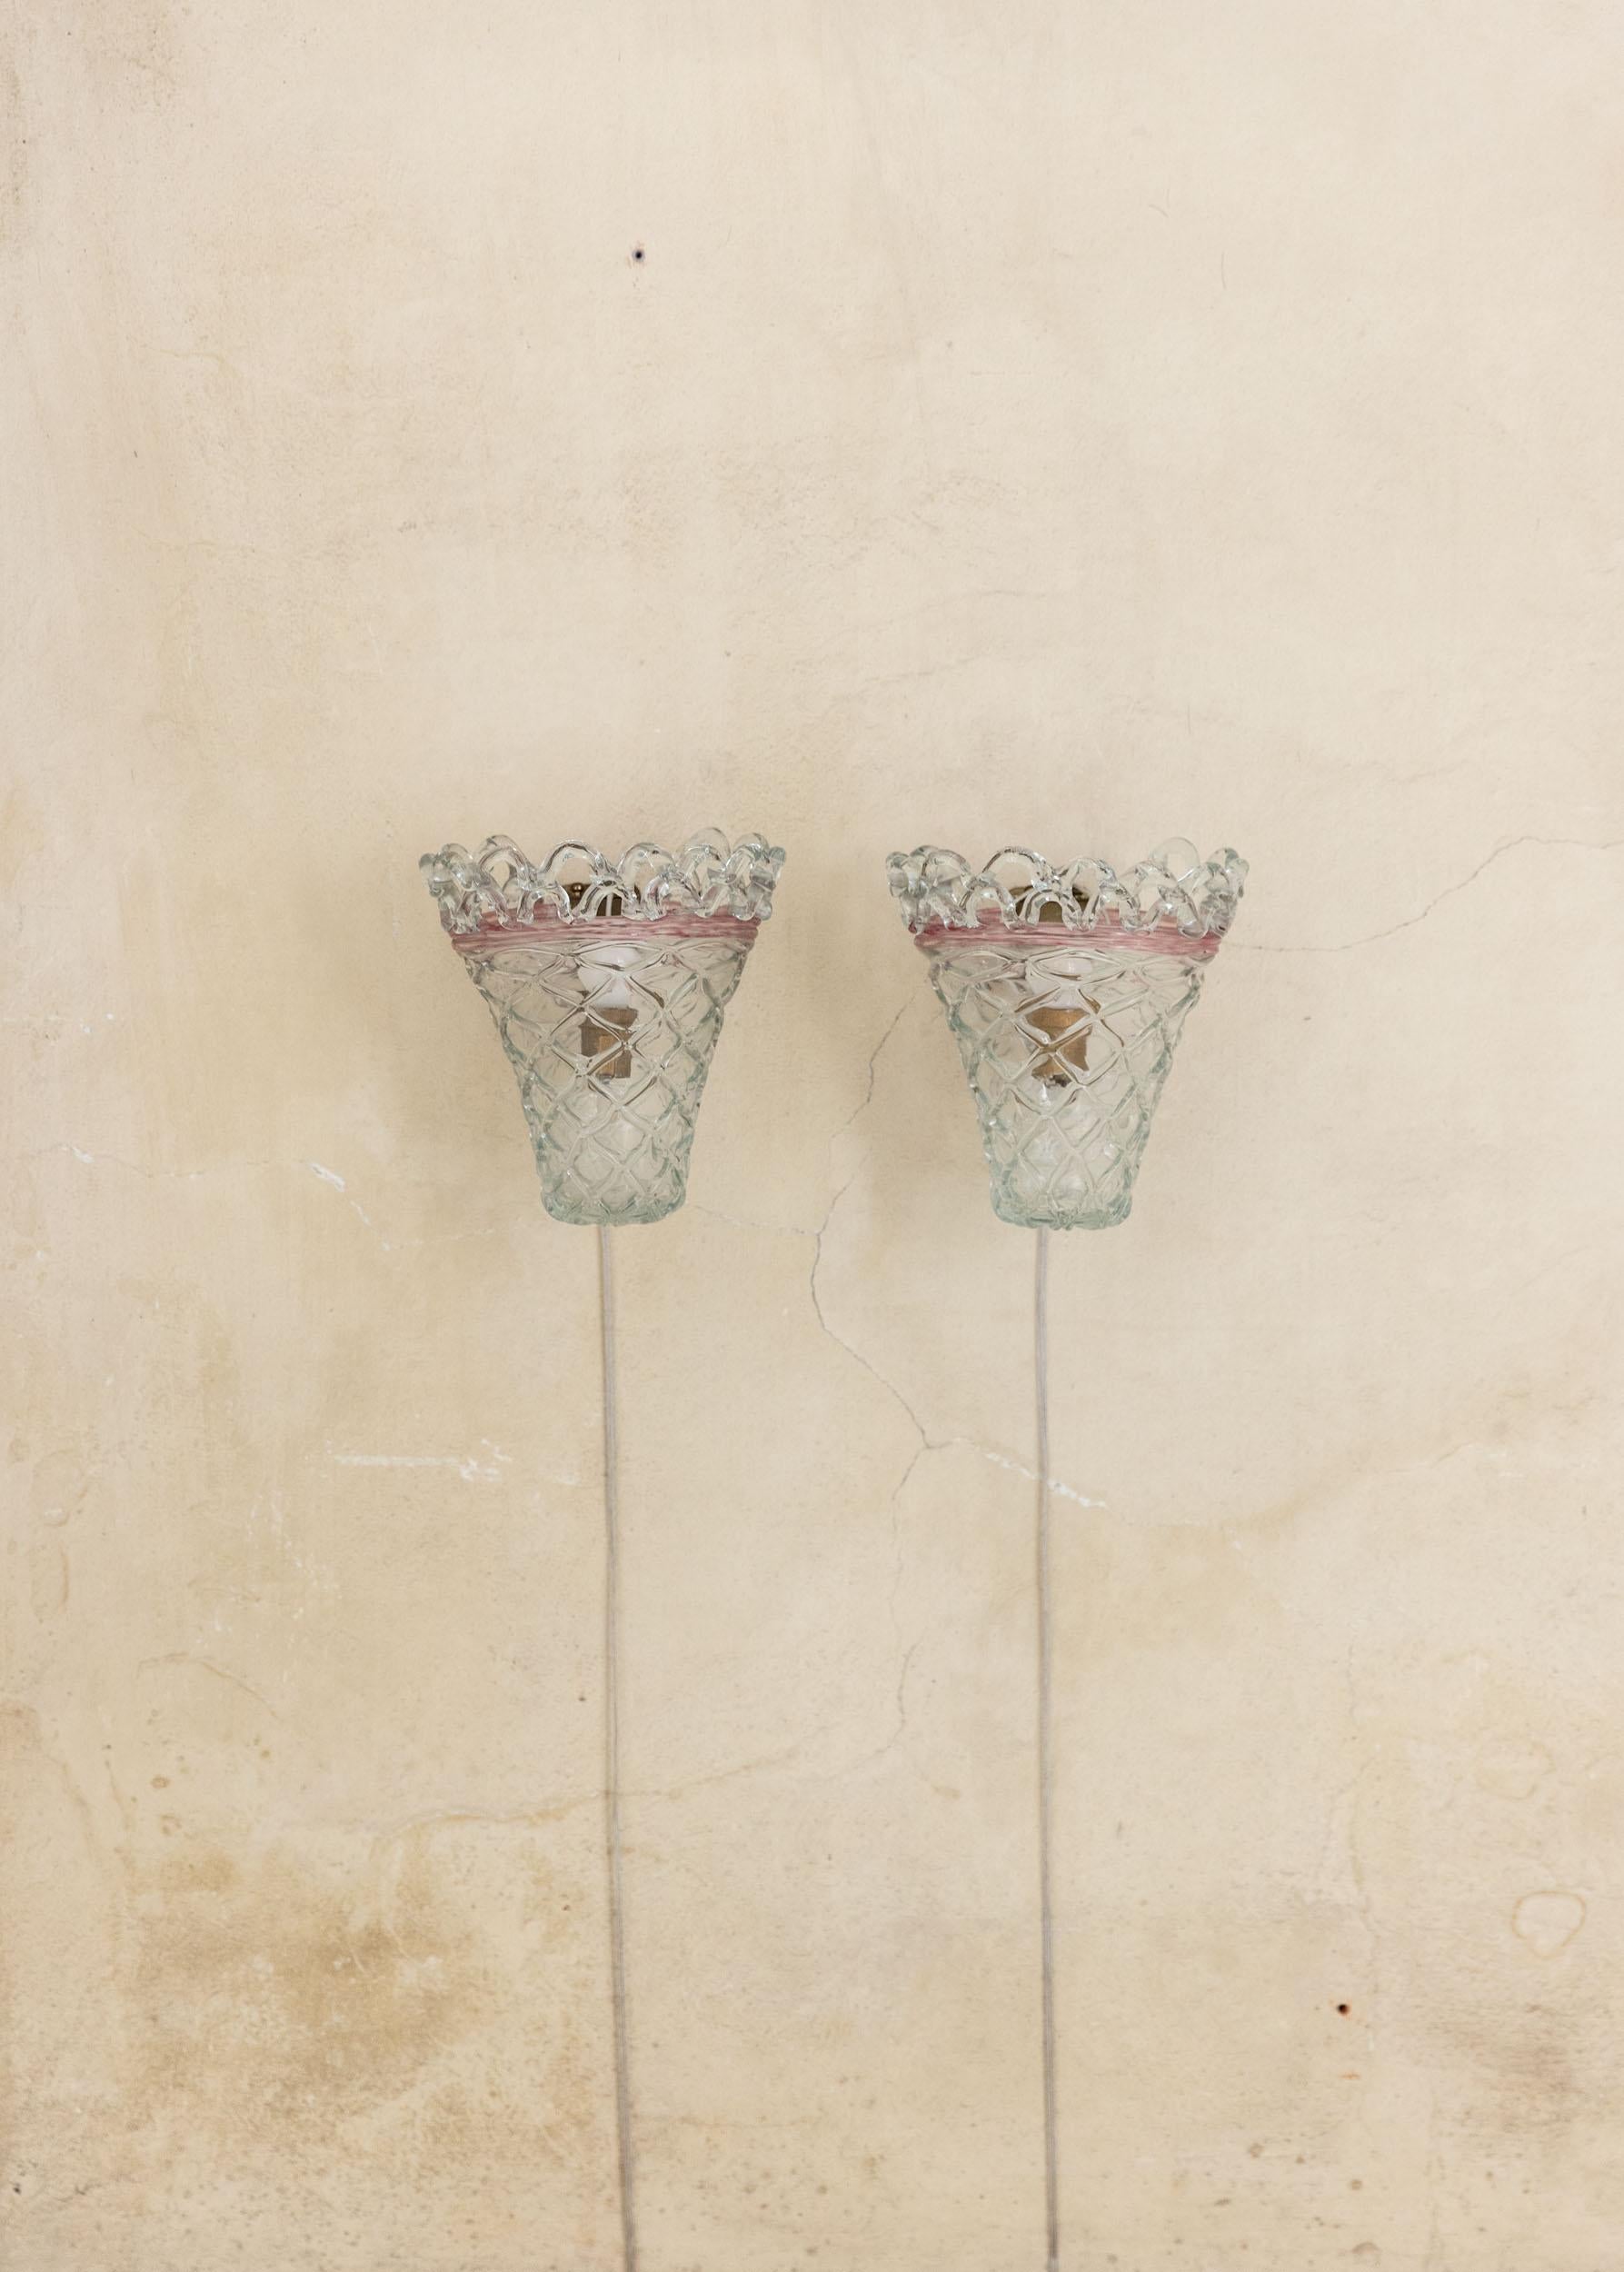 Charming pair of Venini wall lights in clear decorated glass, peculiar pink details and craftsmanship.
Very rare pair.
Marked Venini in the brass.
Italy, 1950s